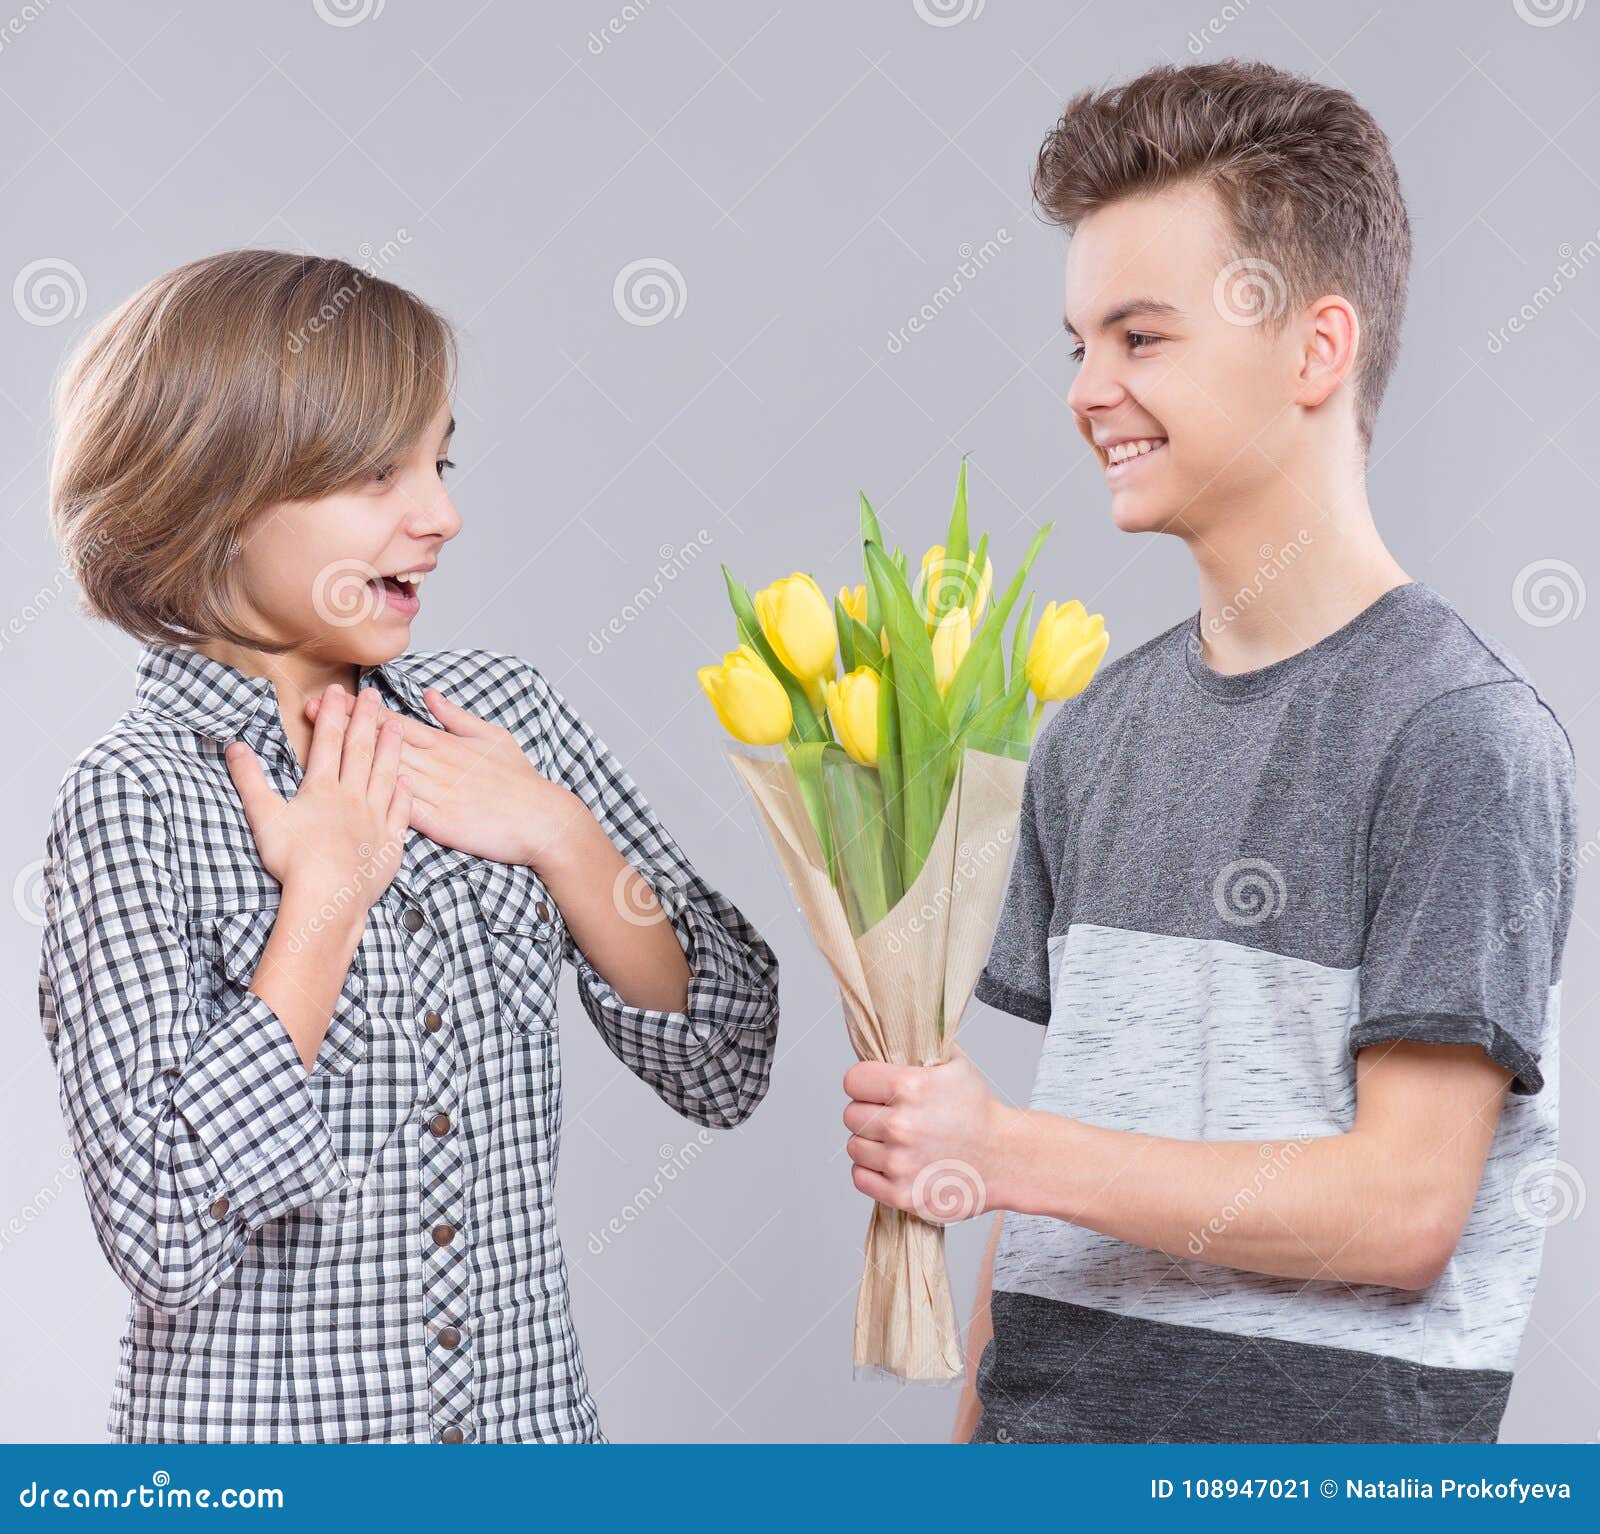 Girl and boy with flowers stock image pic